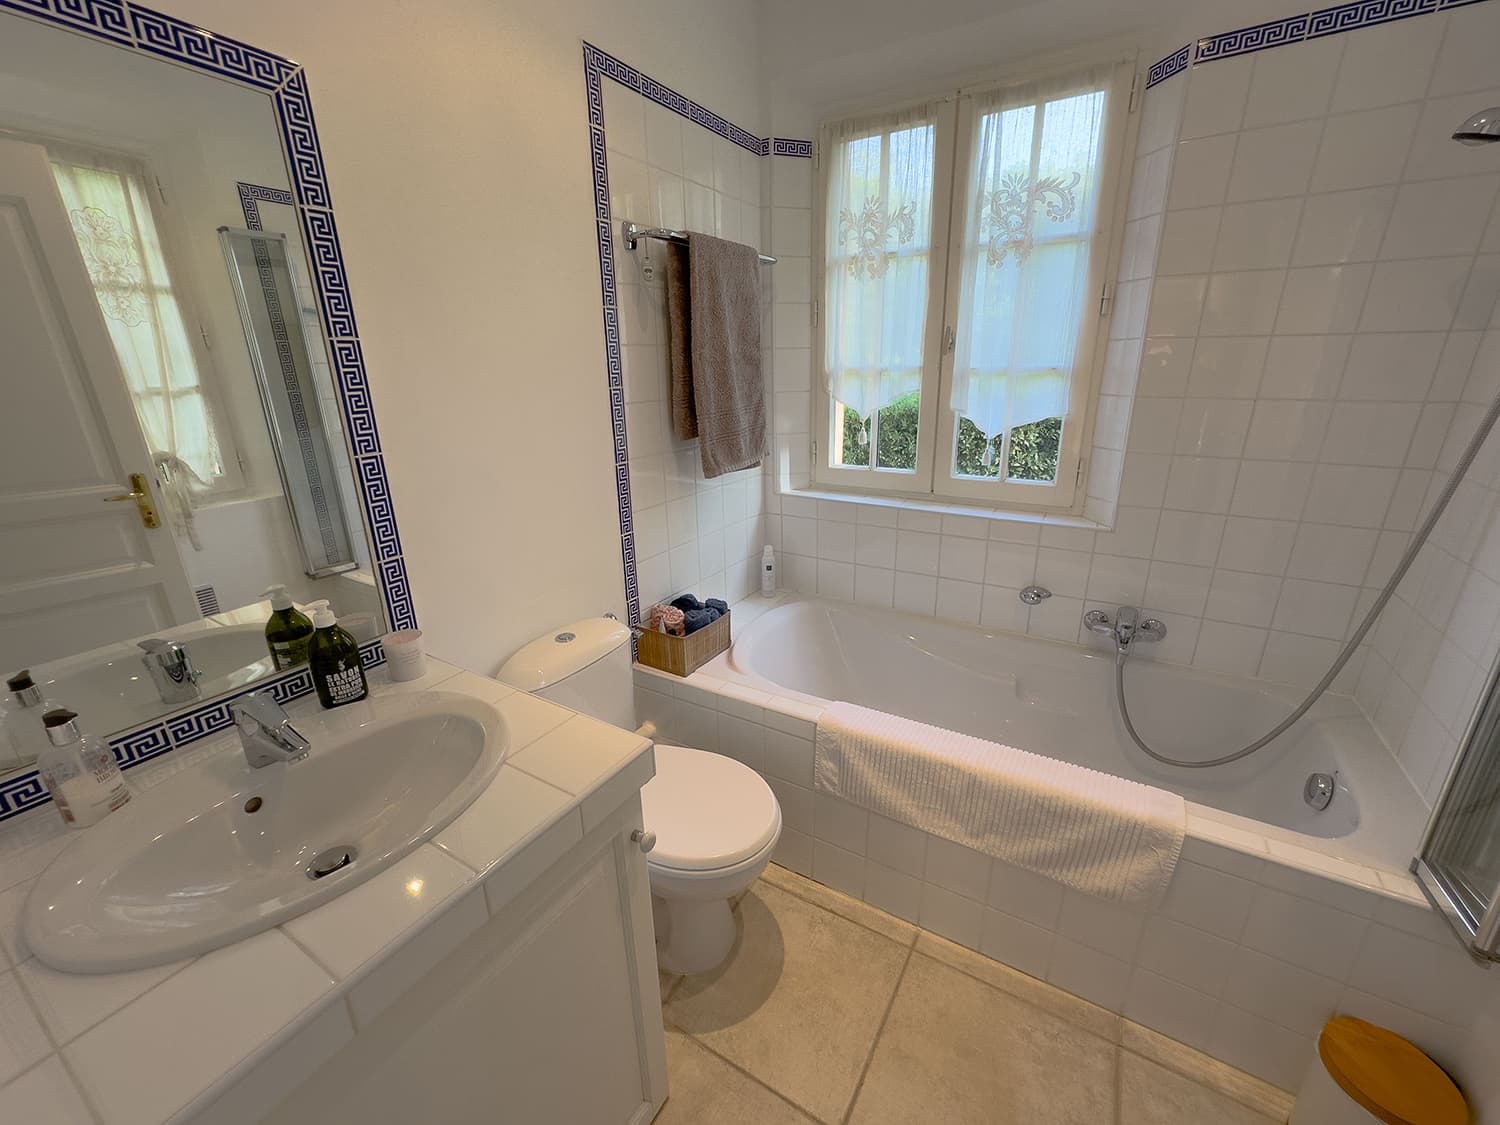 Bathroom | Holiday home in the Var